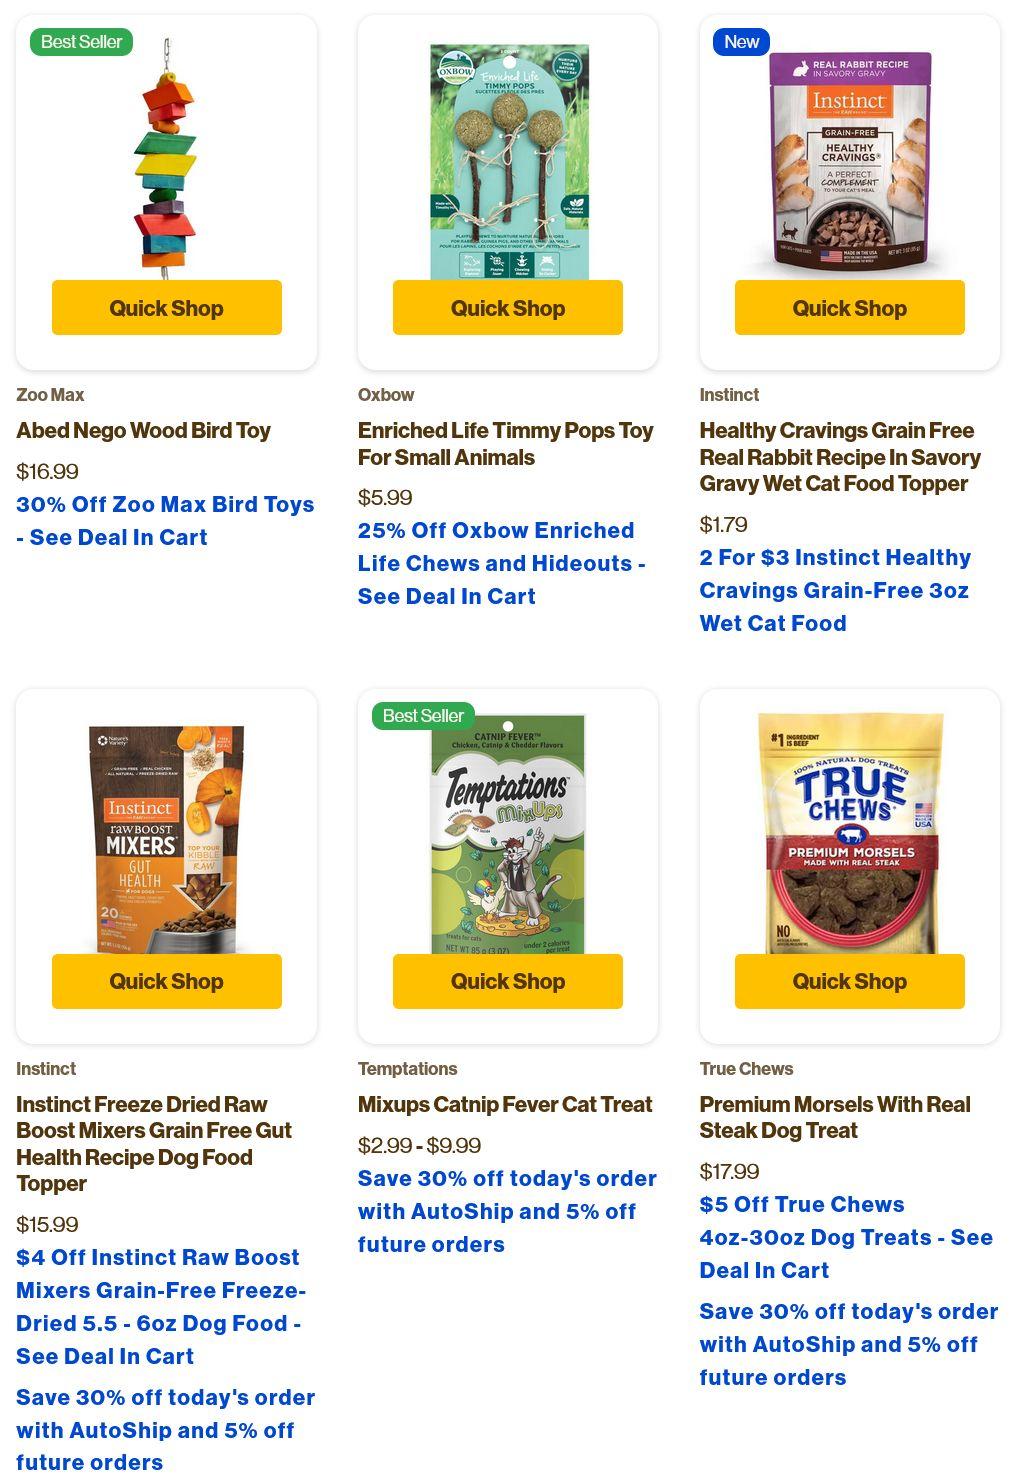 Pet Supermarket Weekly Ad from April 1